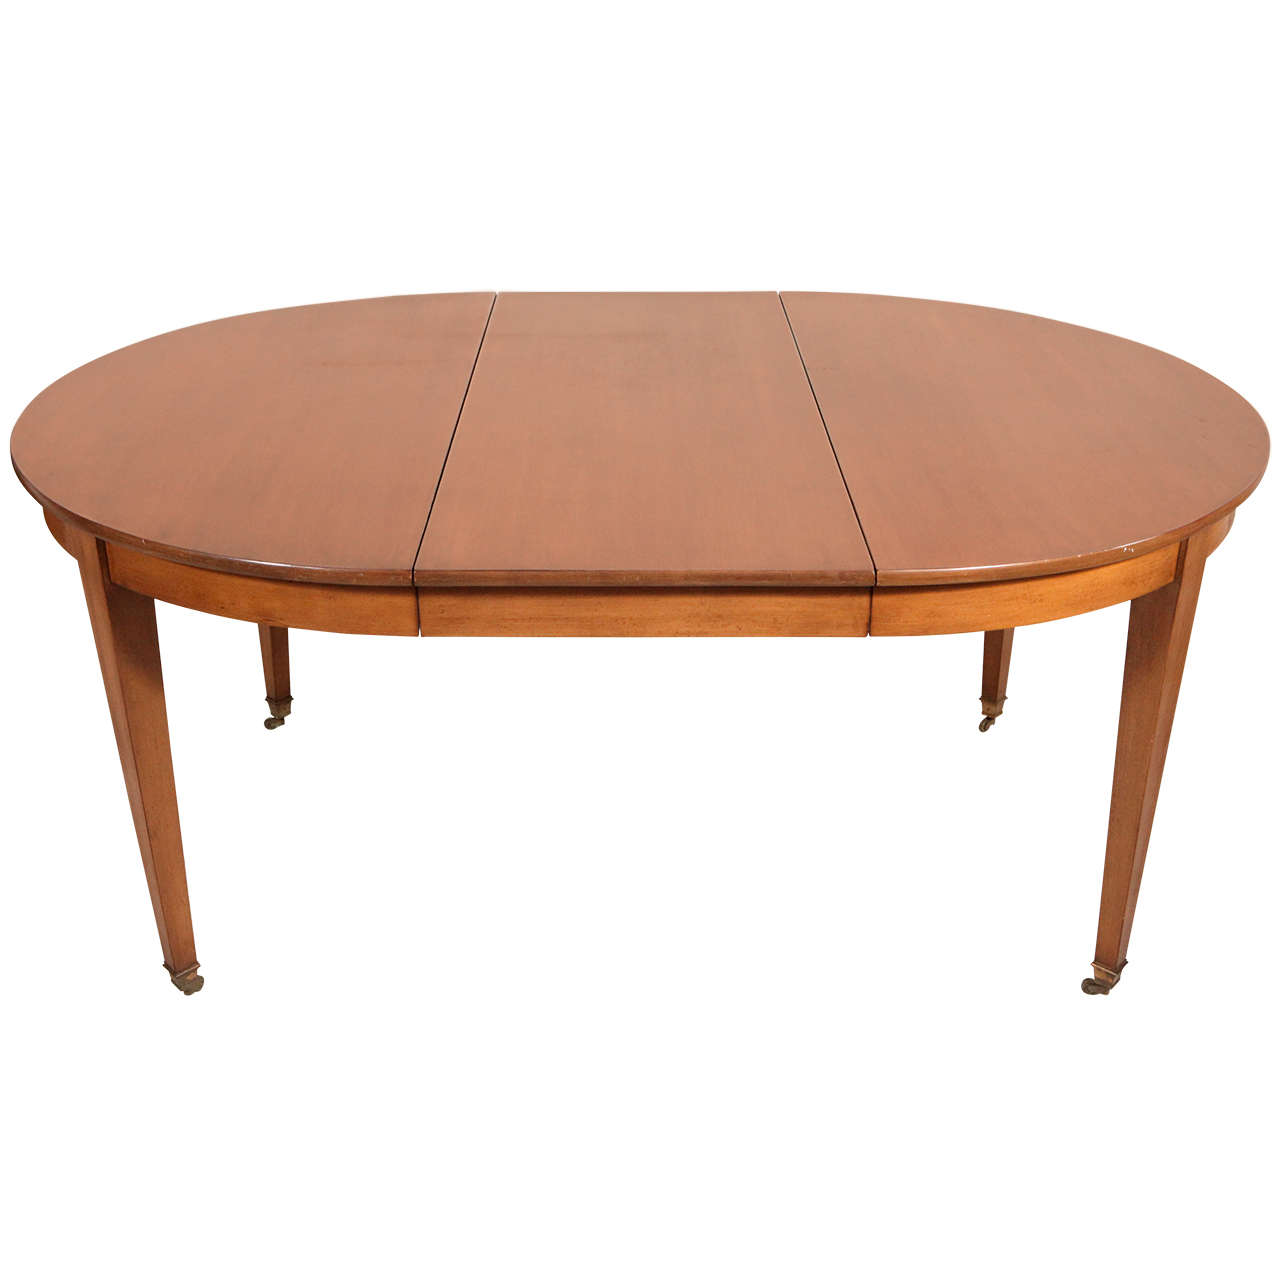 Oval / Round Table with Leaf in the style of Edward Wormley